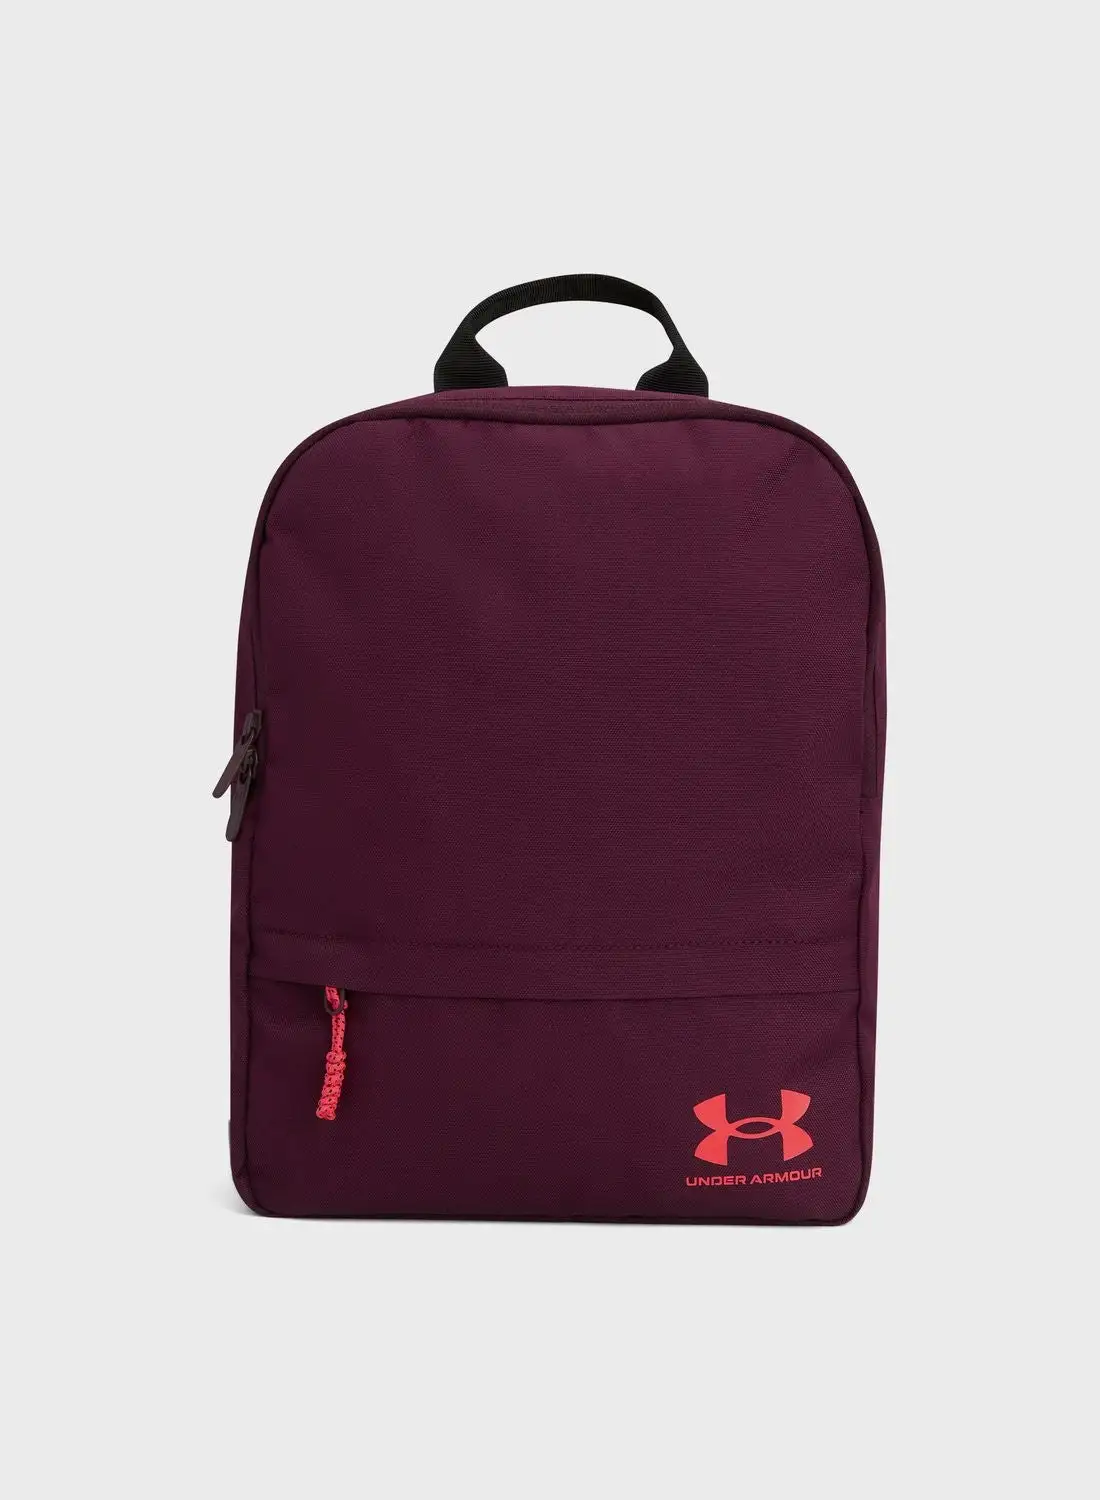 UNDER ARMOUR Loudon Backpack-S